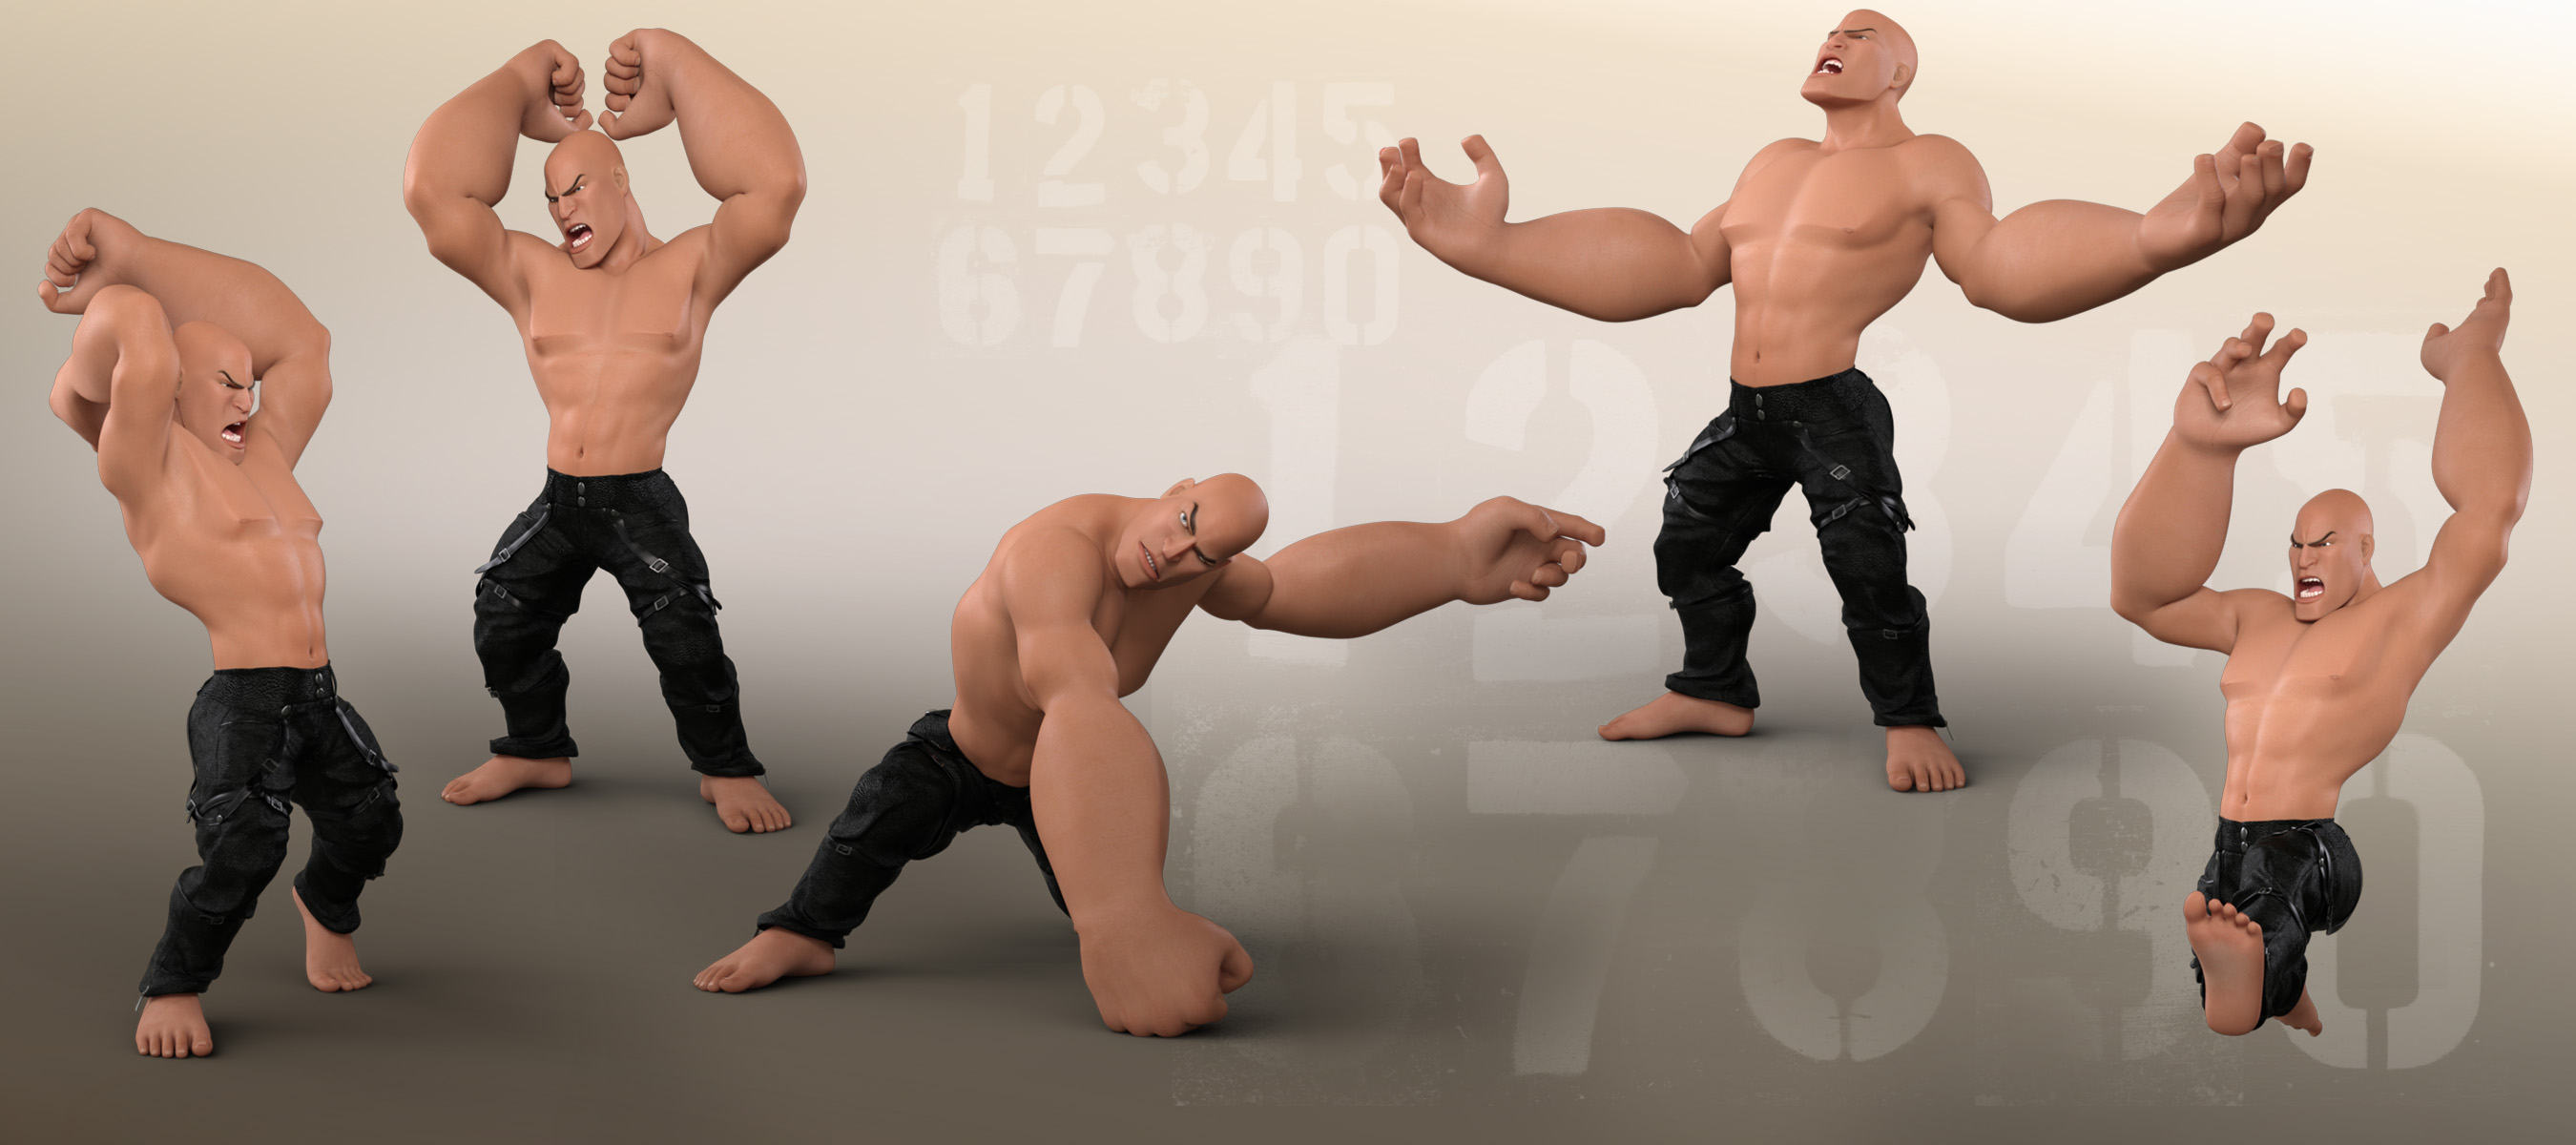 Z Almighty Powers - Poses and Expressions for Toon Dwayne 8 and Genesis 8 Male by: Zeddicuss, 3D Models by Daz 3D